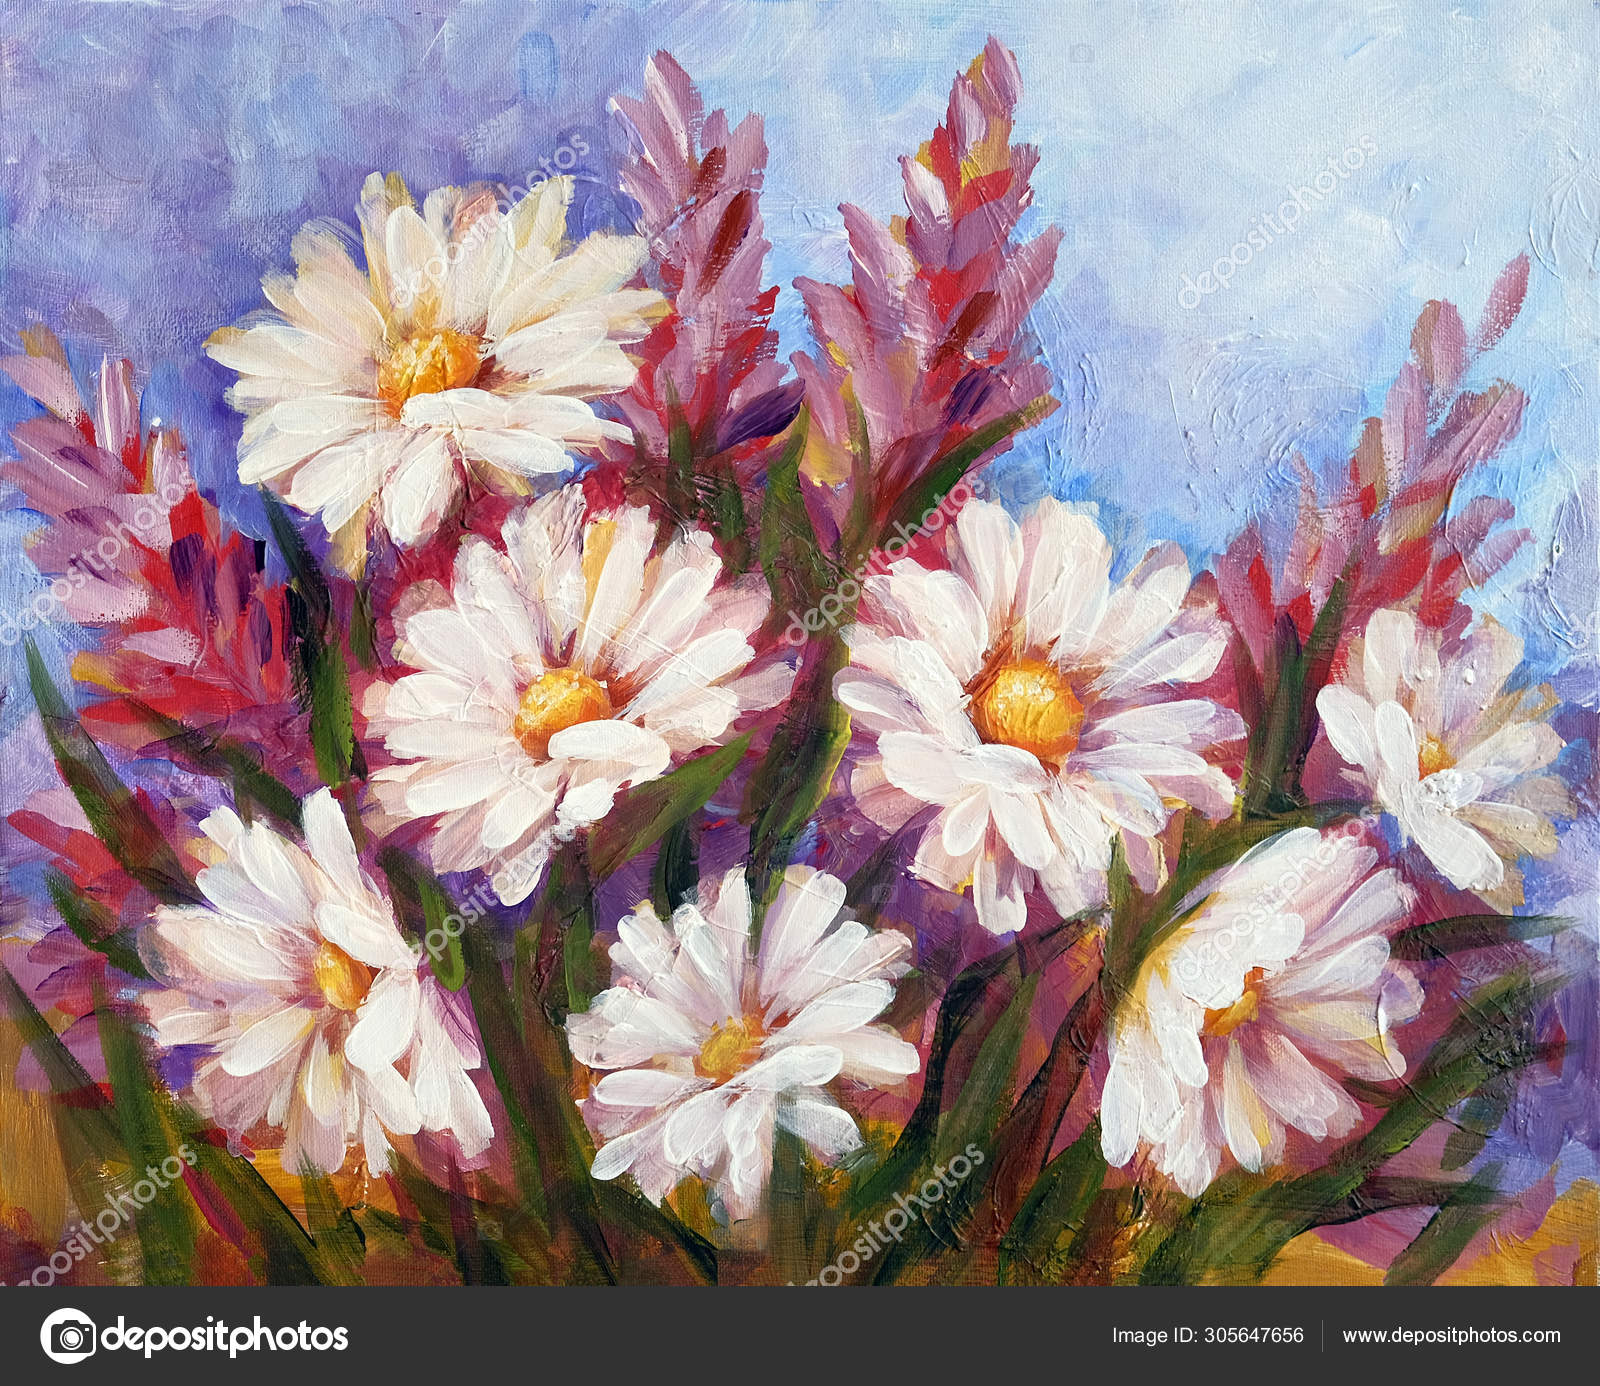 Wild Meadow Flowers With Daisies Bouquet Oil Painting Stock Photo C Valenty 305647656